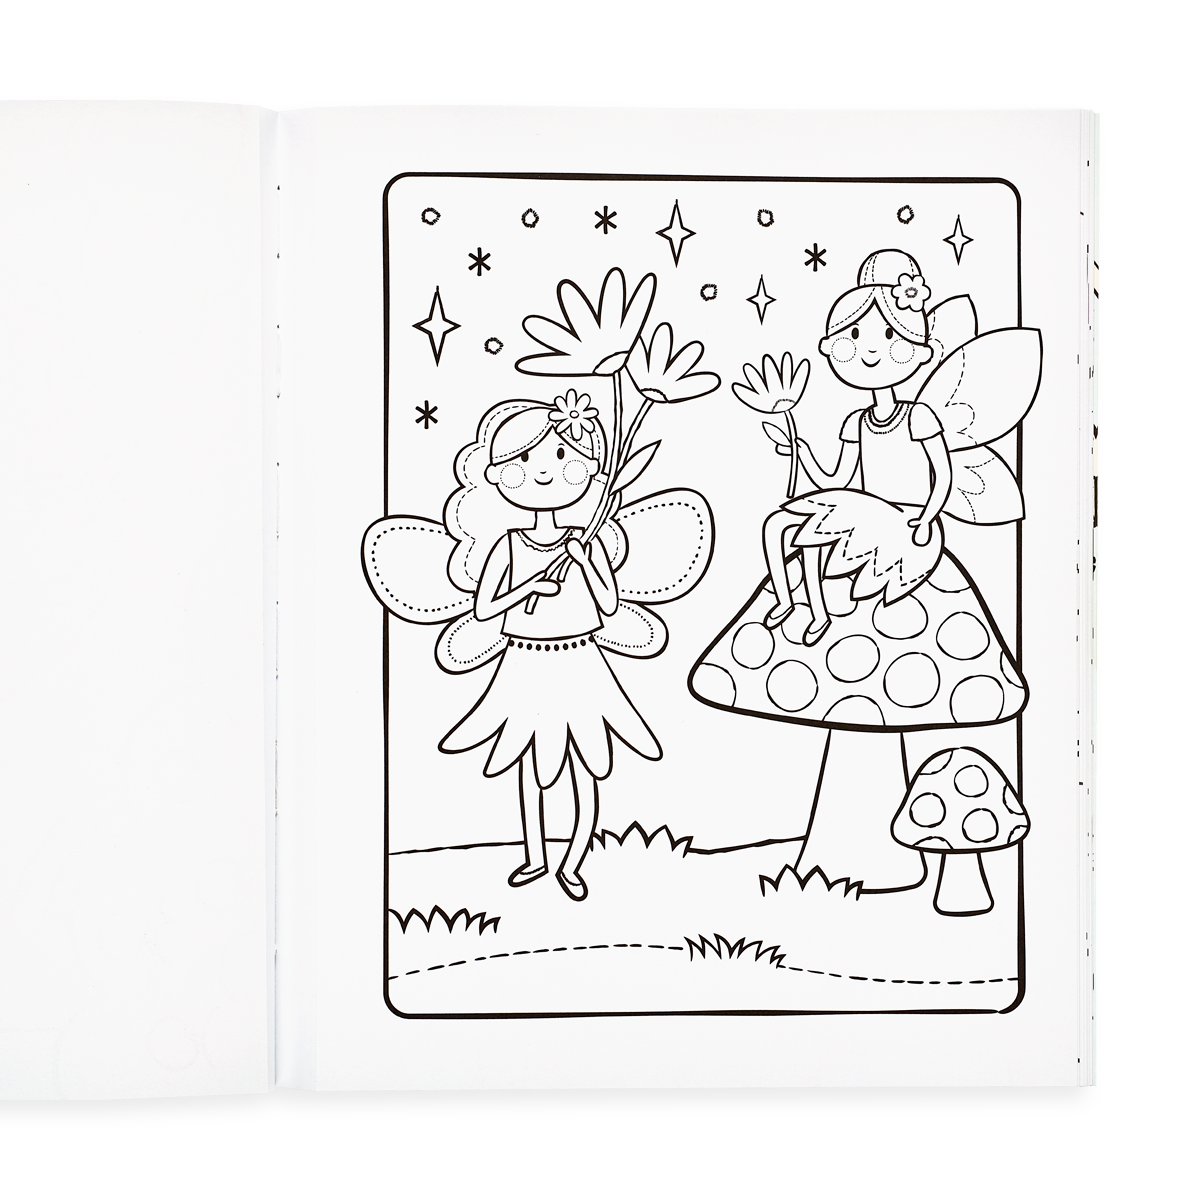 pictures of fairies to color for kids